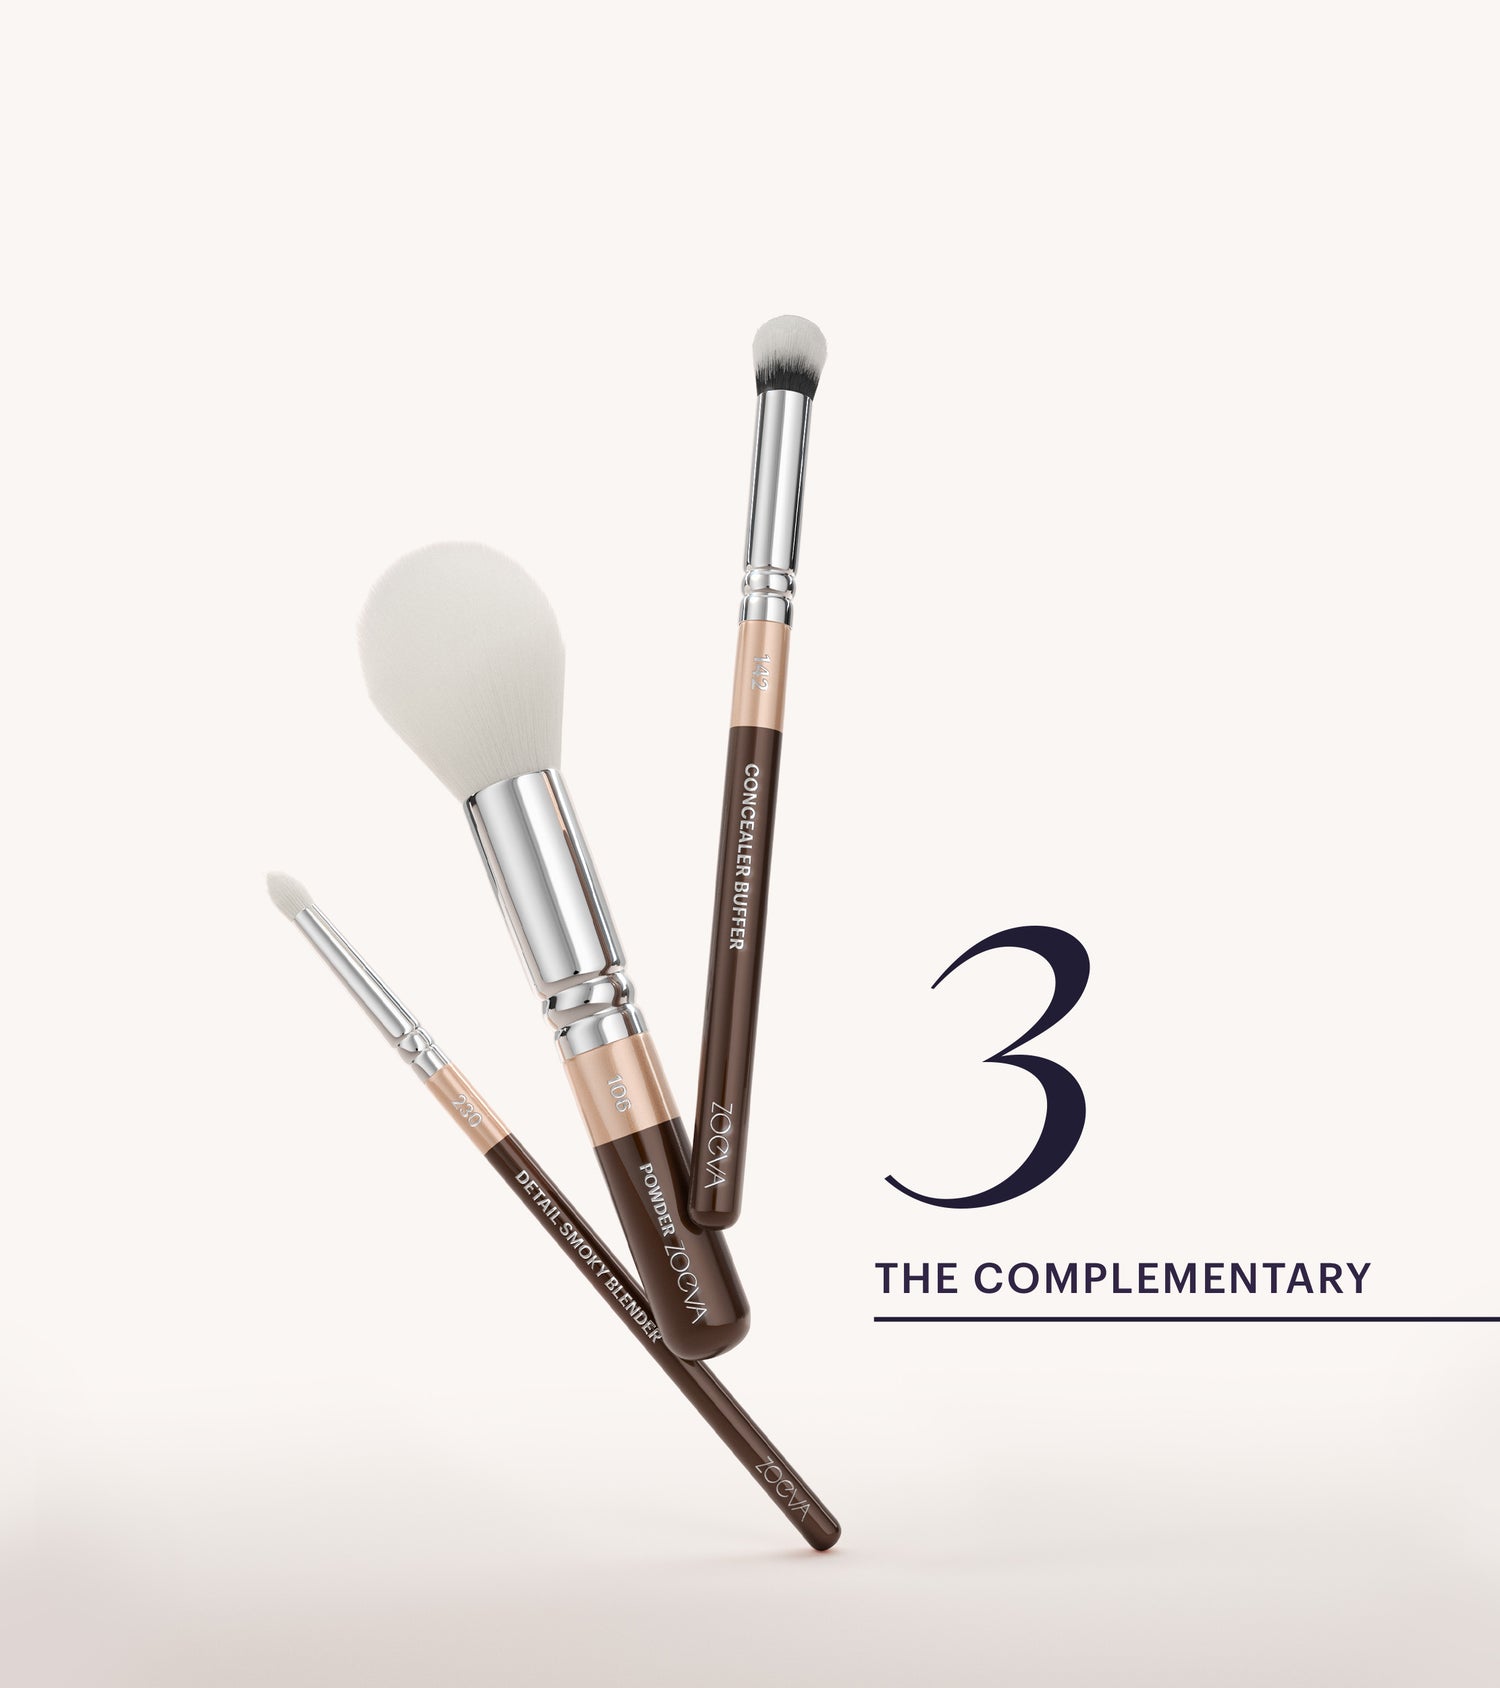 The Complete Brush Set (Chocolate) Main Image featured